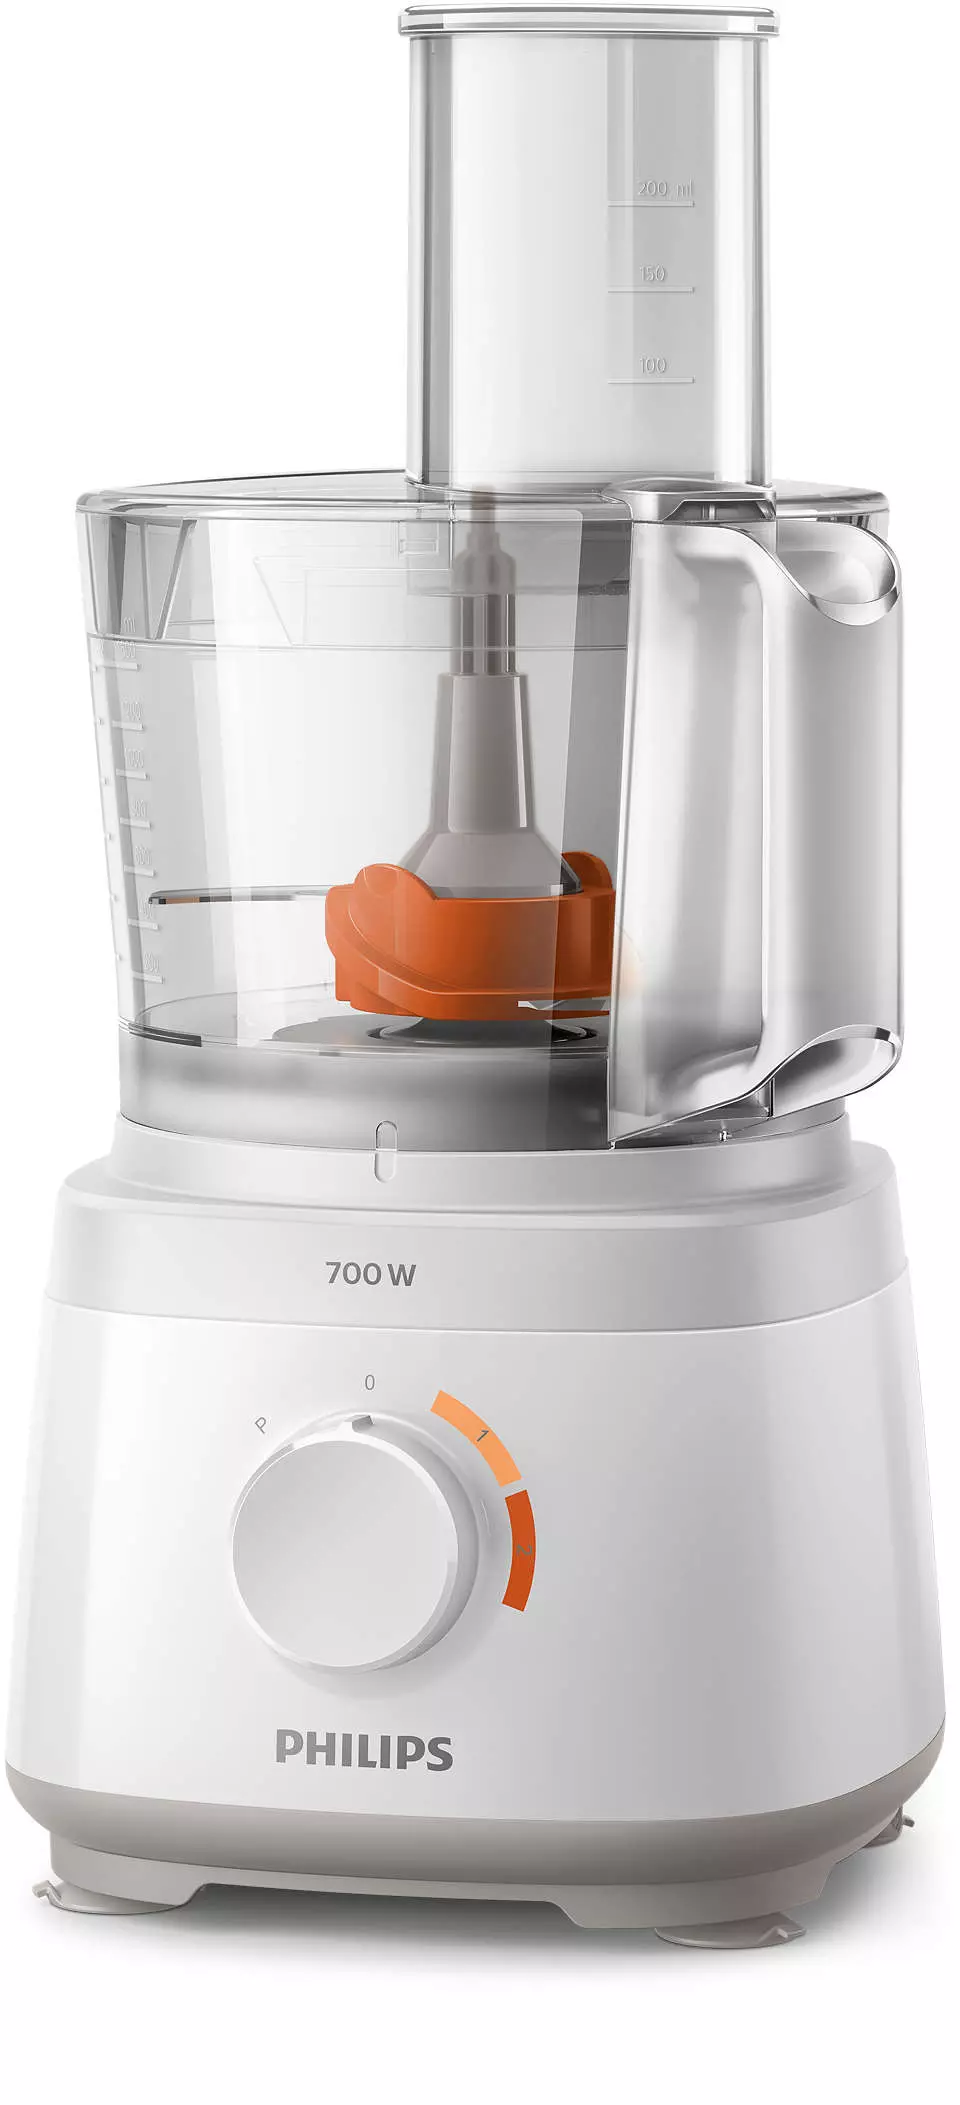 Philips Compact Food Processor W Daily